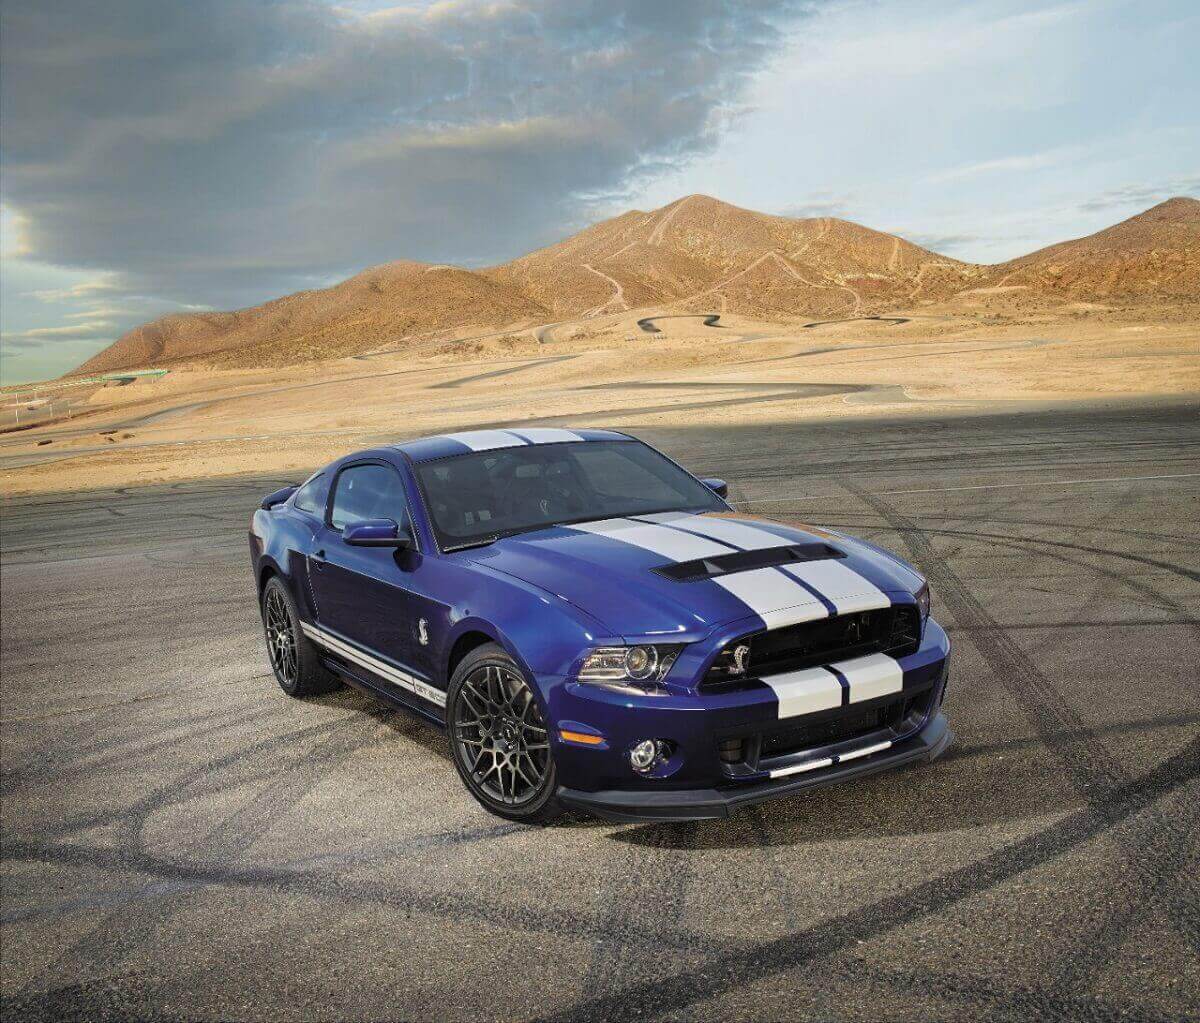 An S197 2013 Ford Mustang Shelby GT500 shows off its blue paintwork and white stripes.